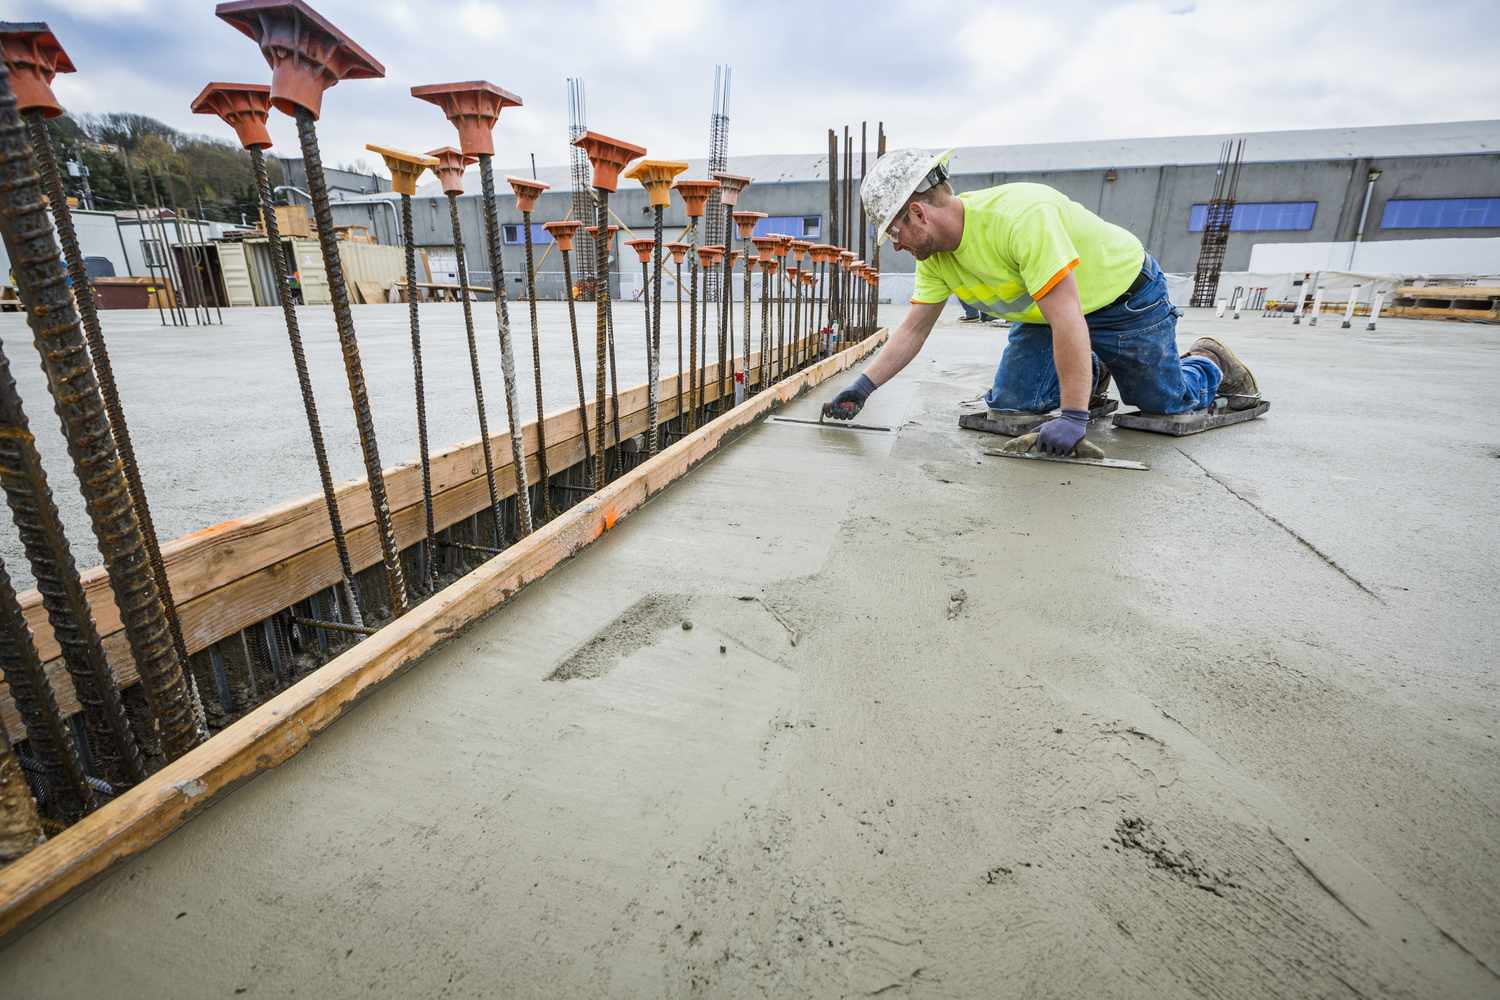 Concrete curing process with hydration, moisture, and temperature